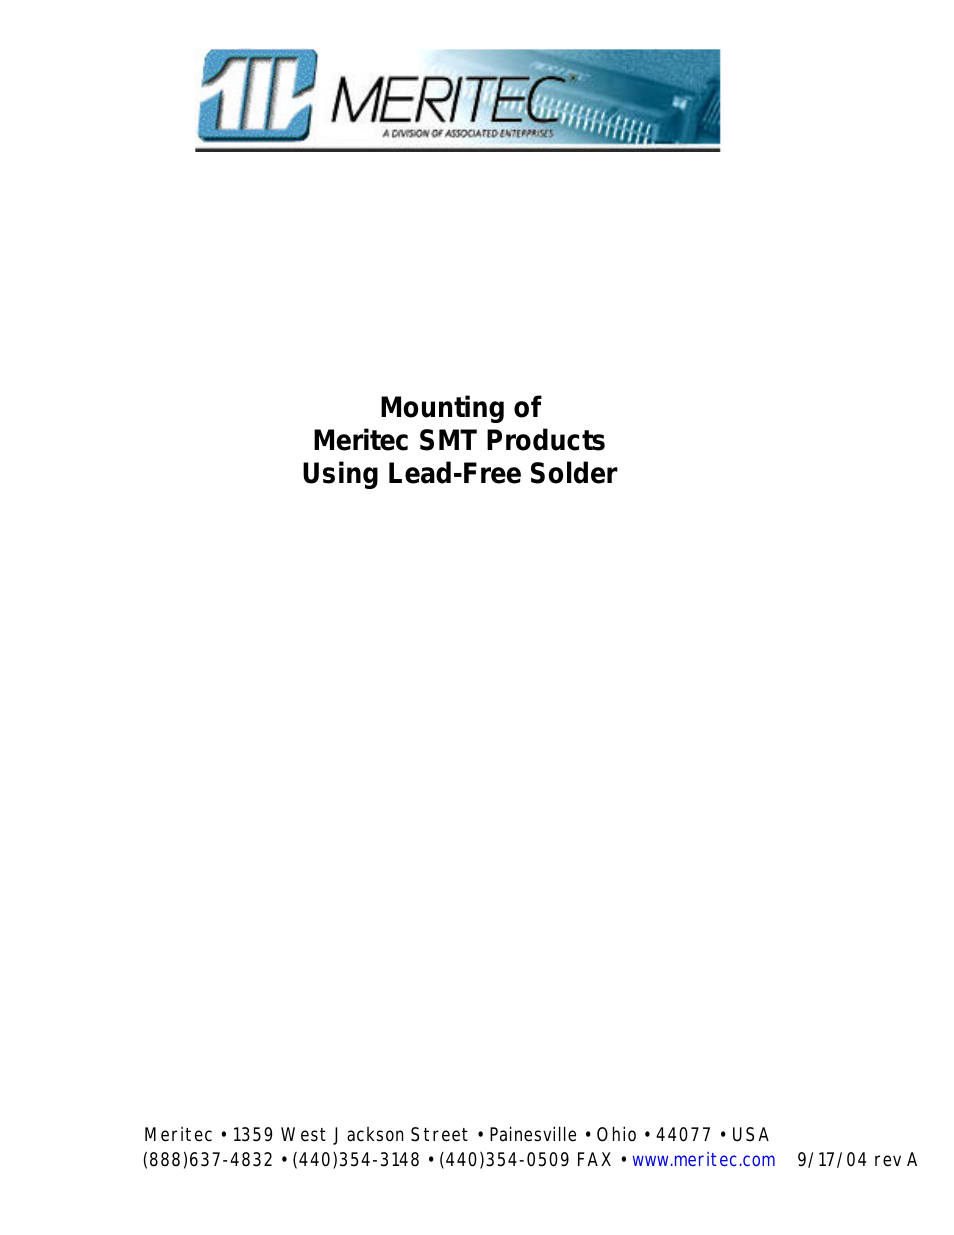 Meritec SMT Products Using Lead-Free Solder (Page 1)